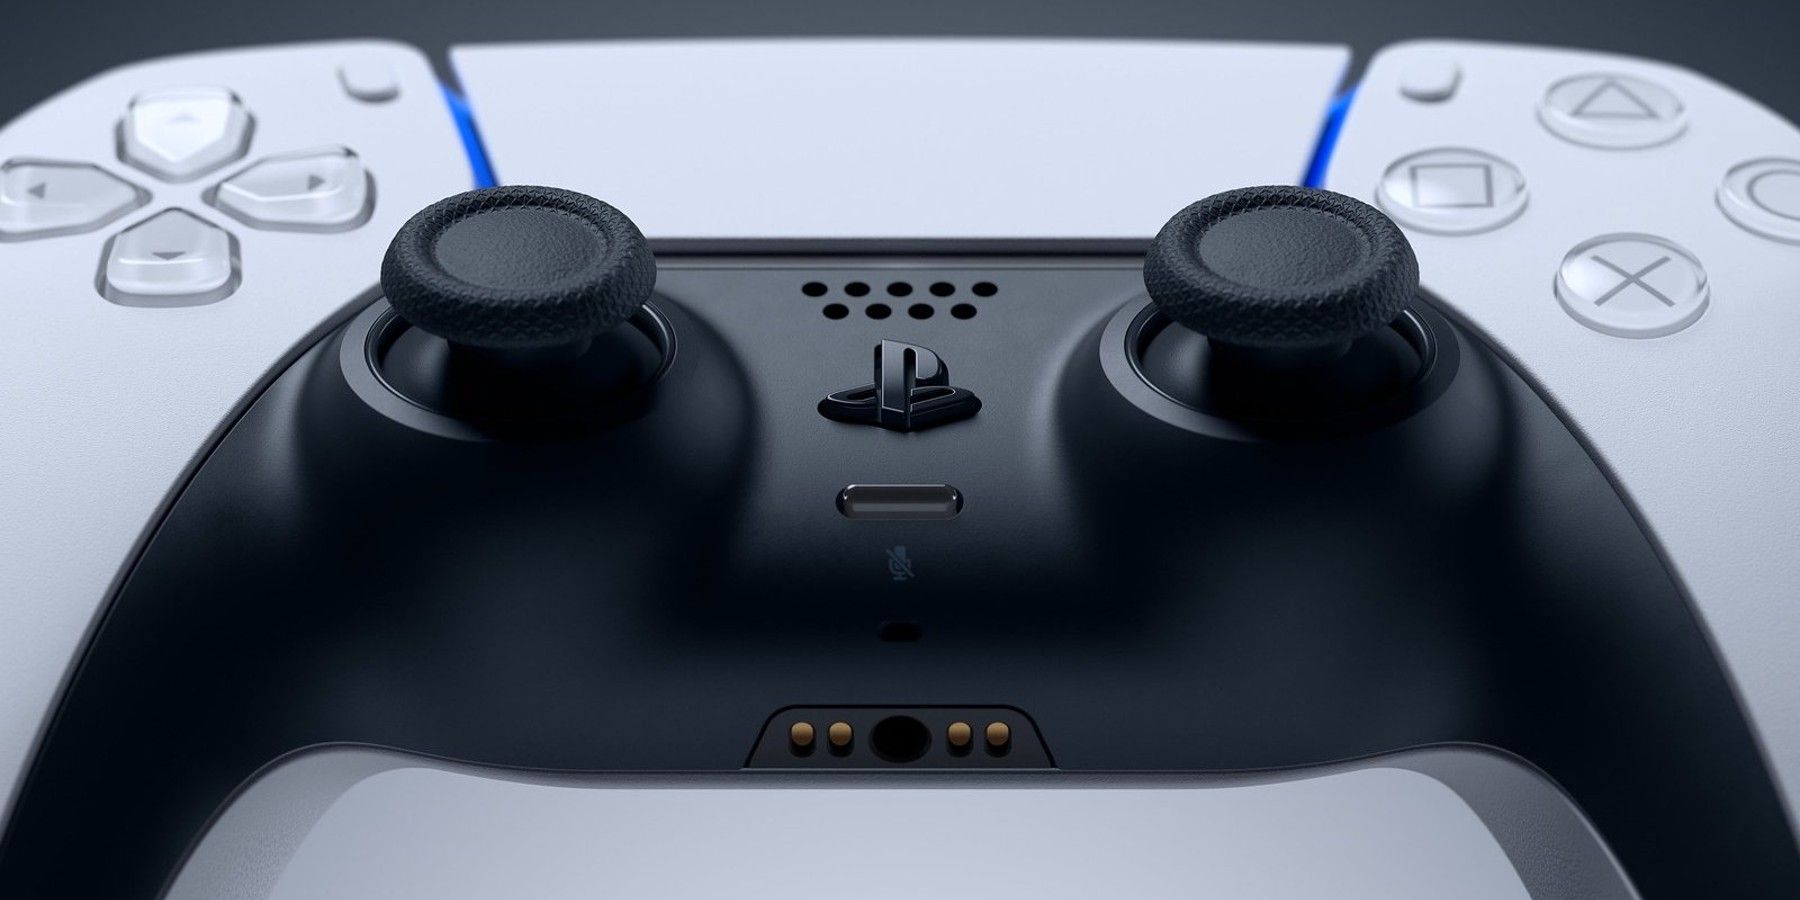 How to connect a PS5 controller to any device - Android Authority